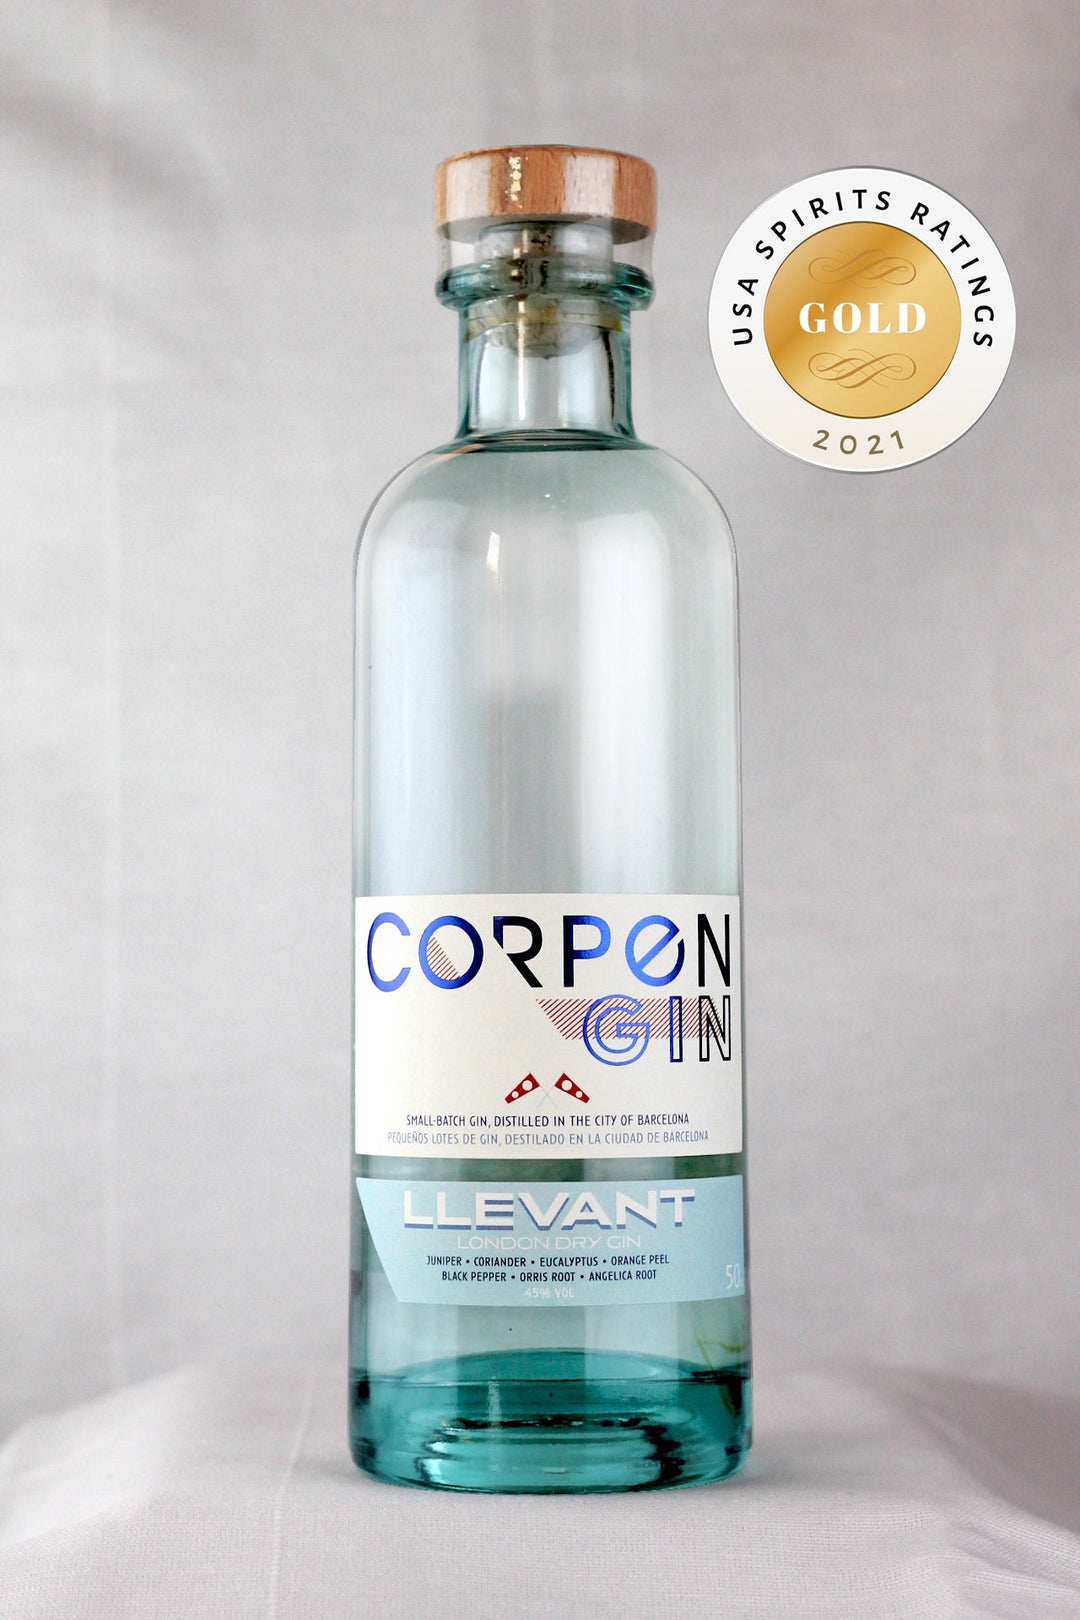 Corpen Gin - Wind of Change